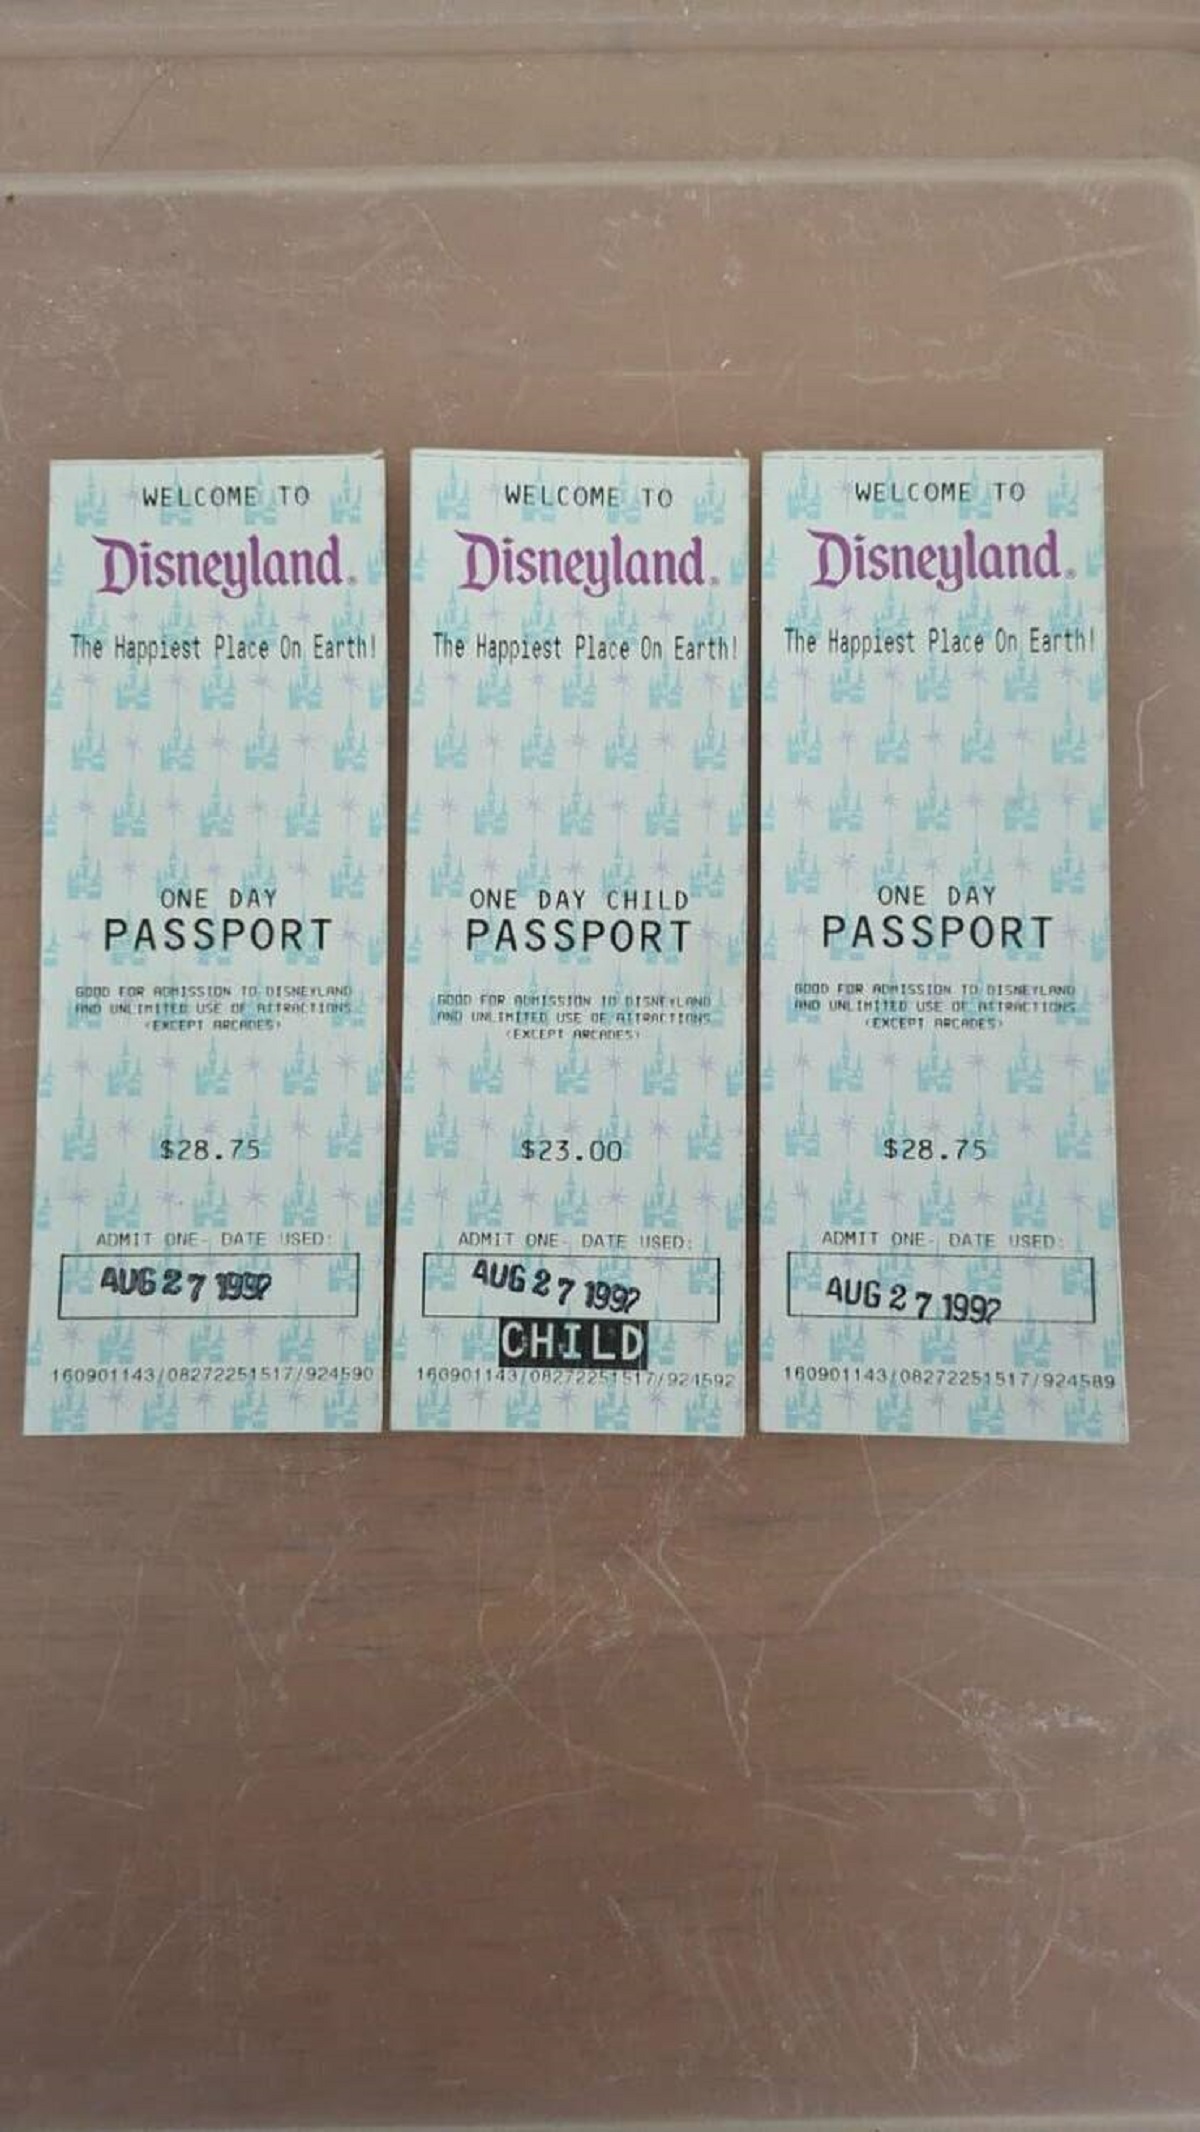 document - Welcome To Disneyland The Platea Welcome To Disneyland. The Hat Flex Earth Welcome To Disneyland. The pet Plate to Eart One Day Passport One Day Child Passport $25.00 One Day Passport $28. Child